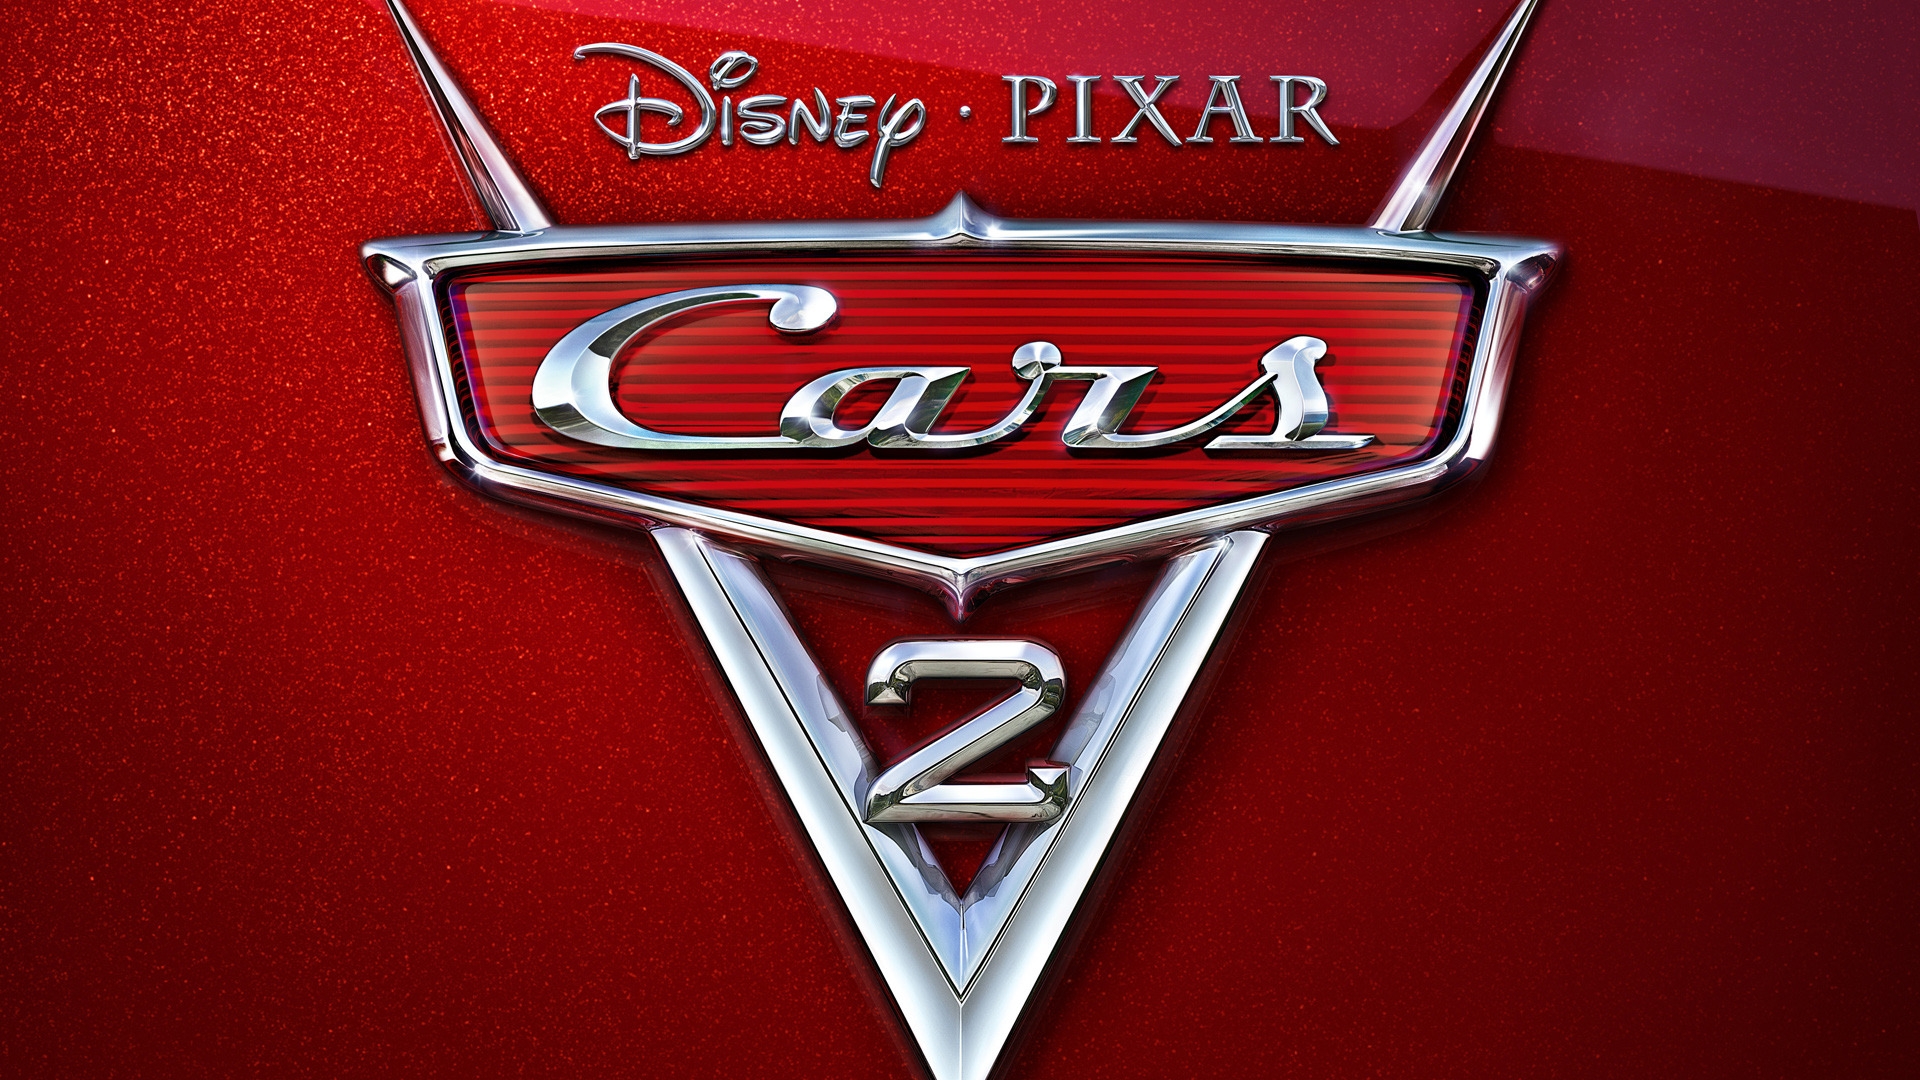 Cars 2 for 1920 x 1080 HDTV 1080p resolution